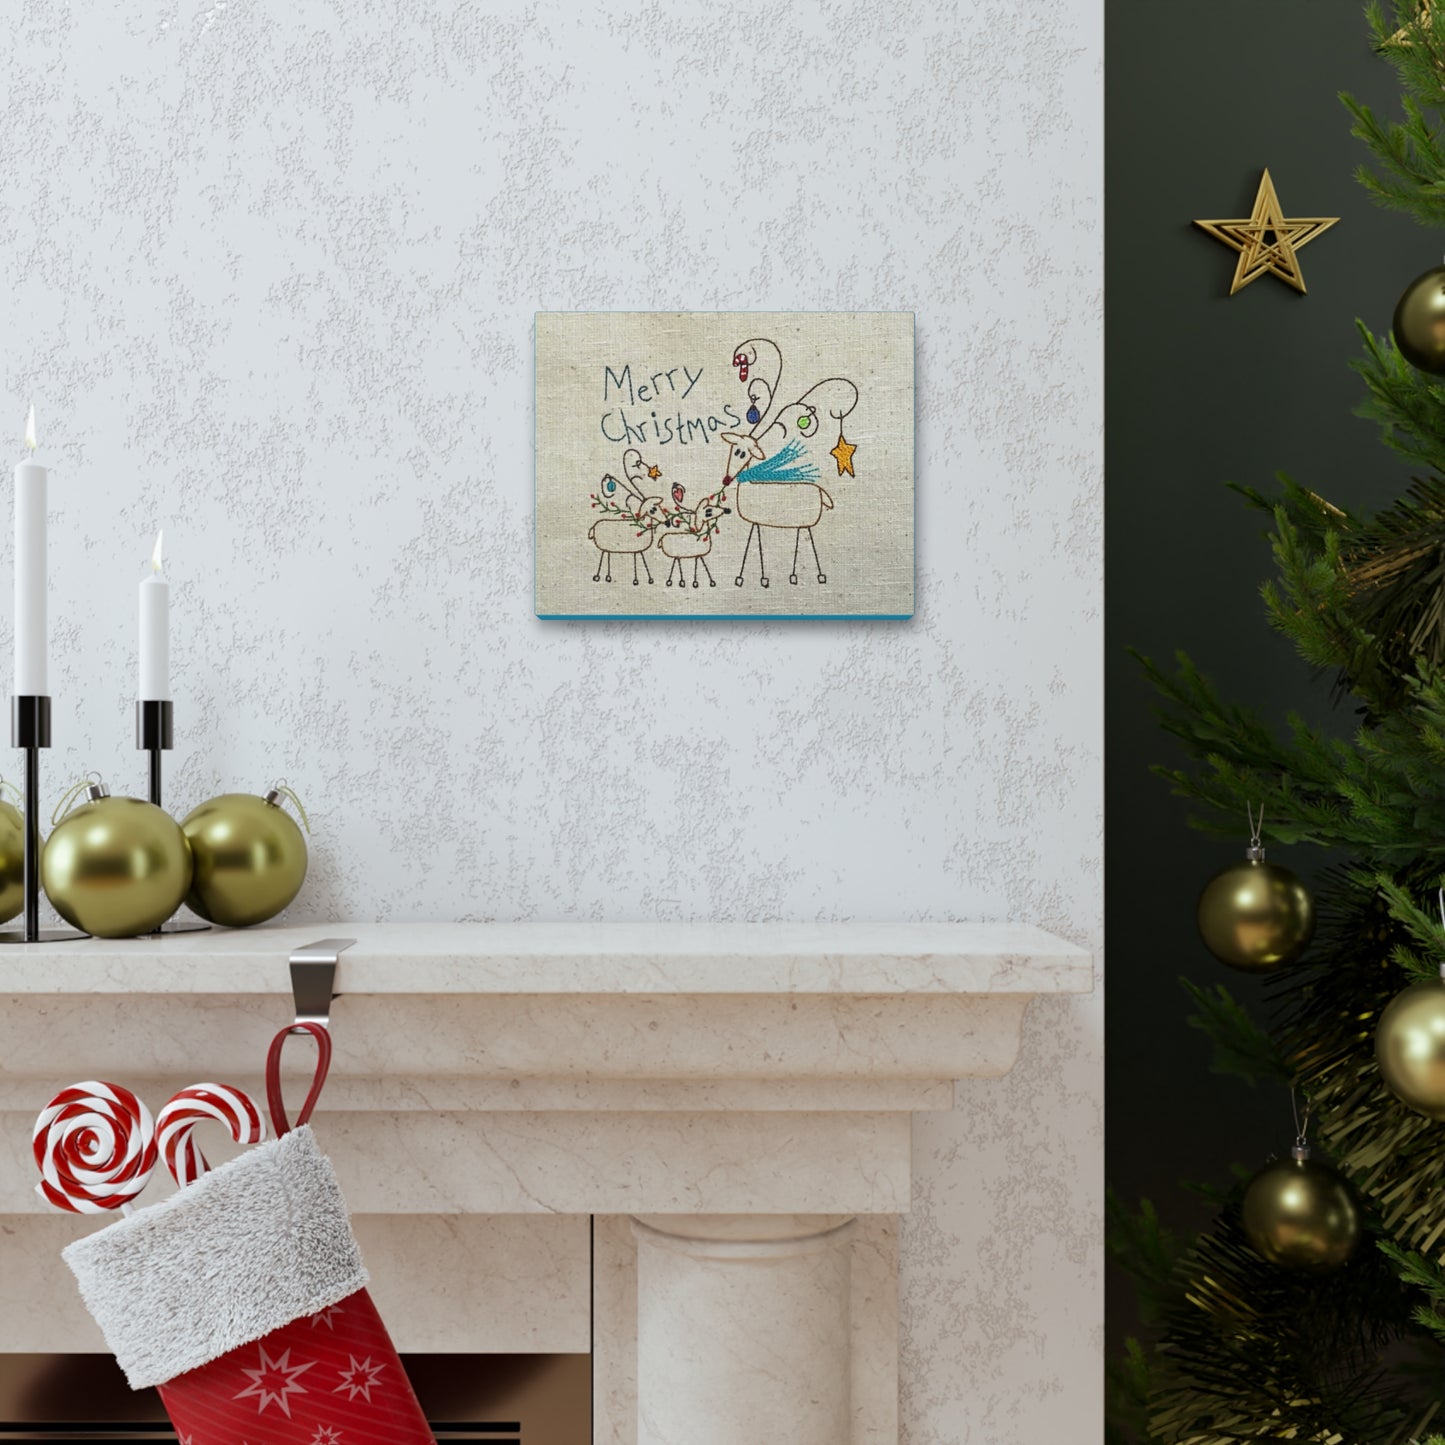 Rudy Merry Christmas Canvas Gallery Wraps